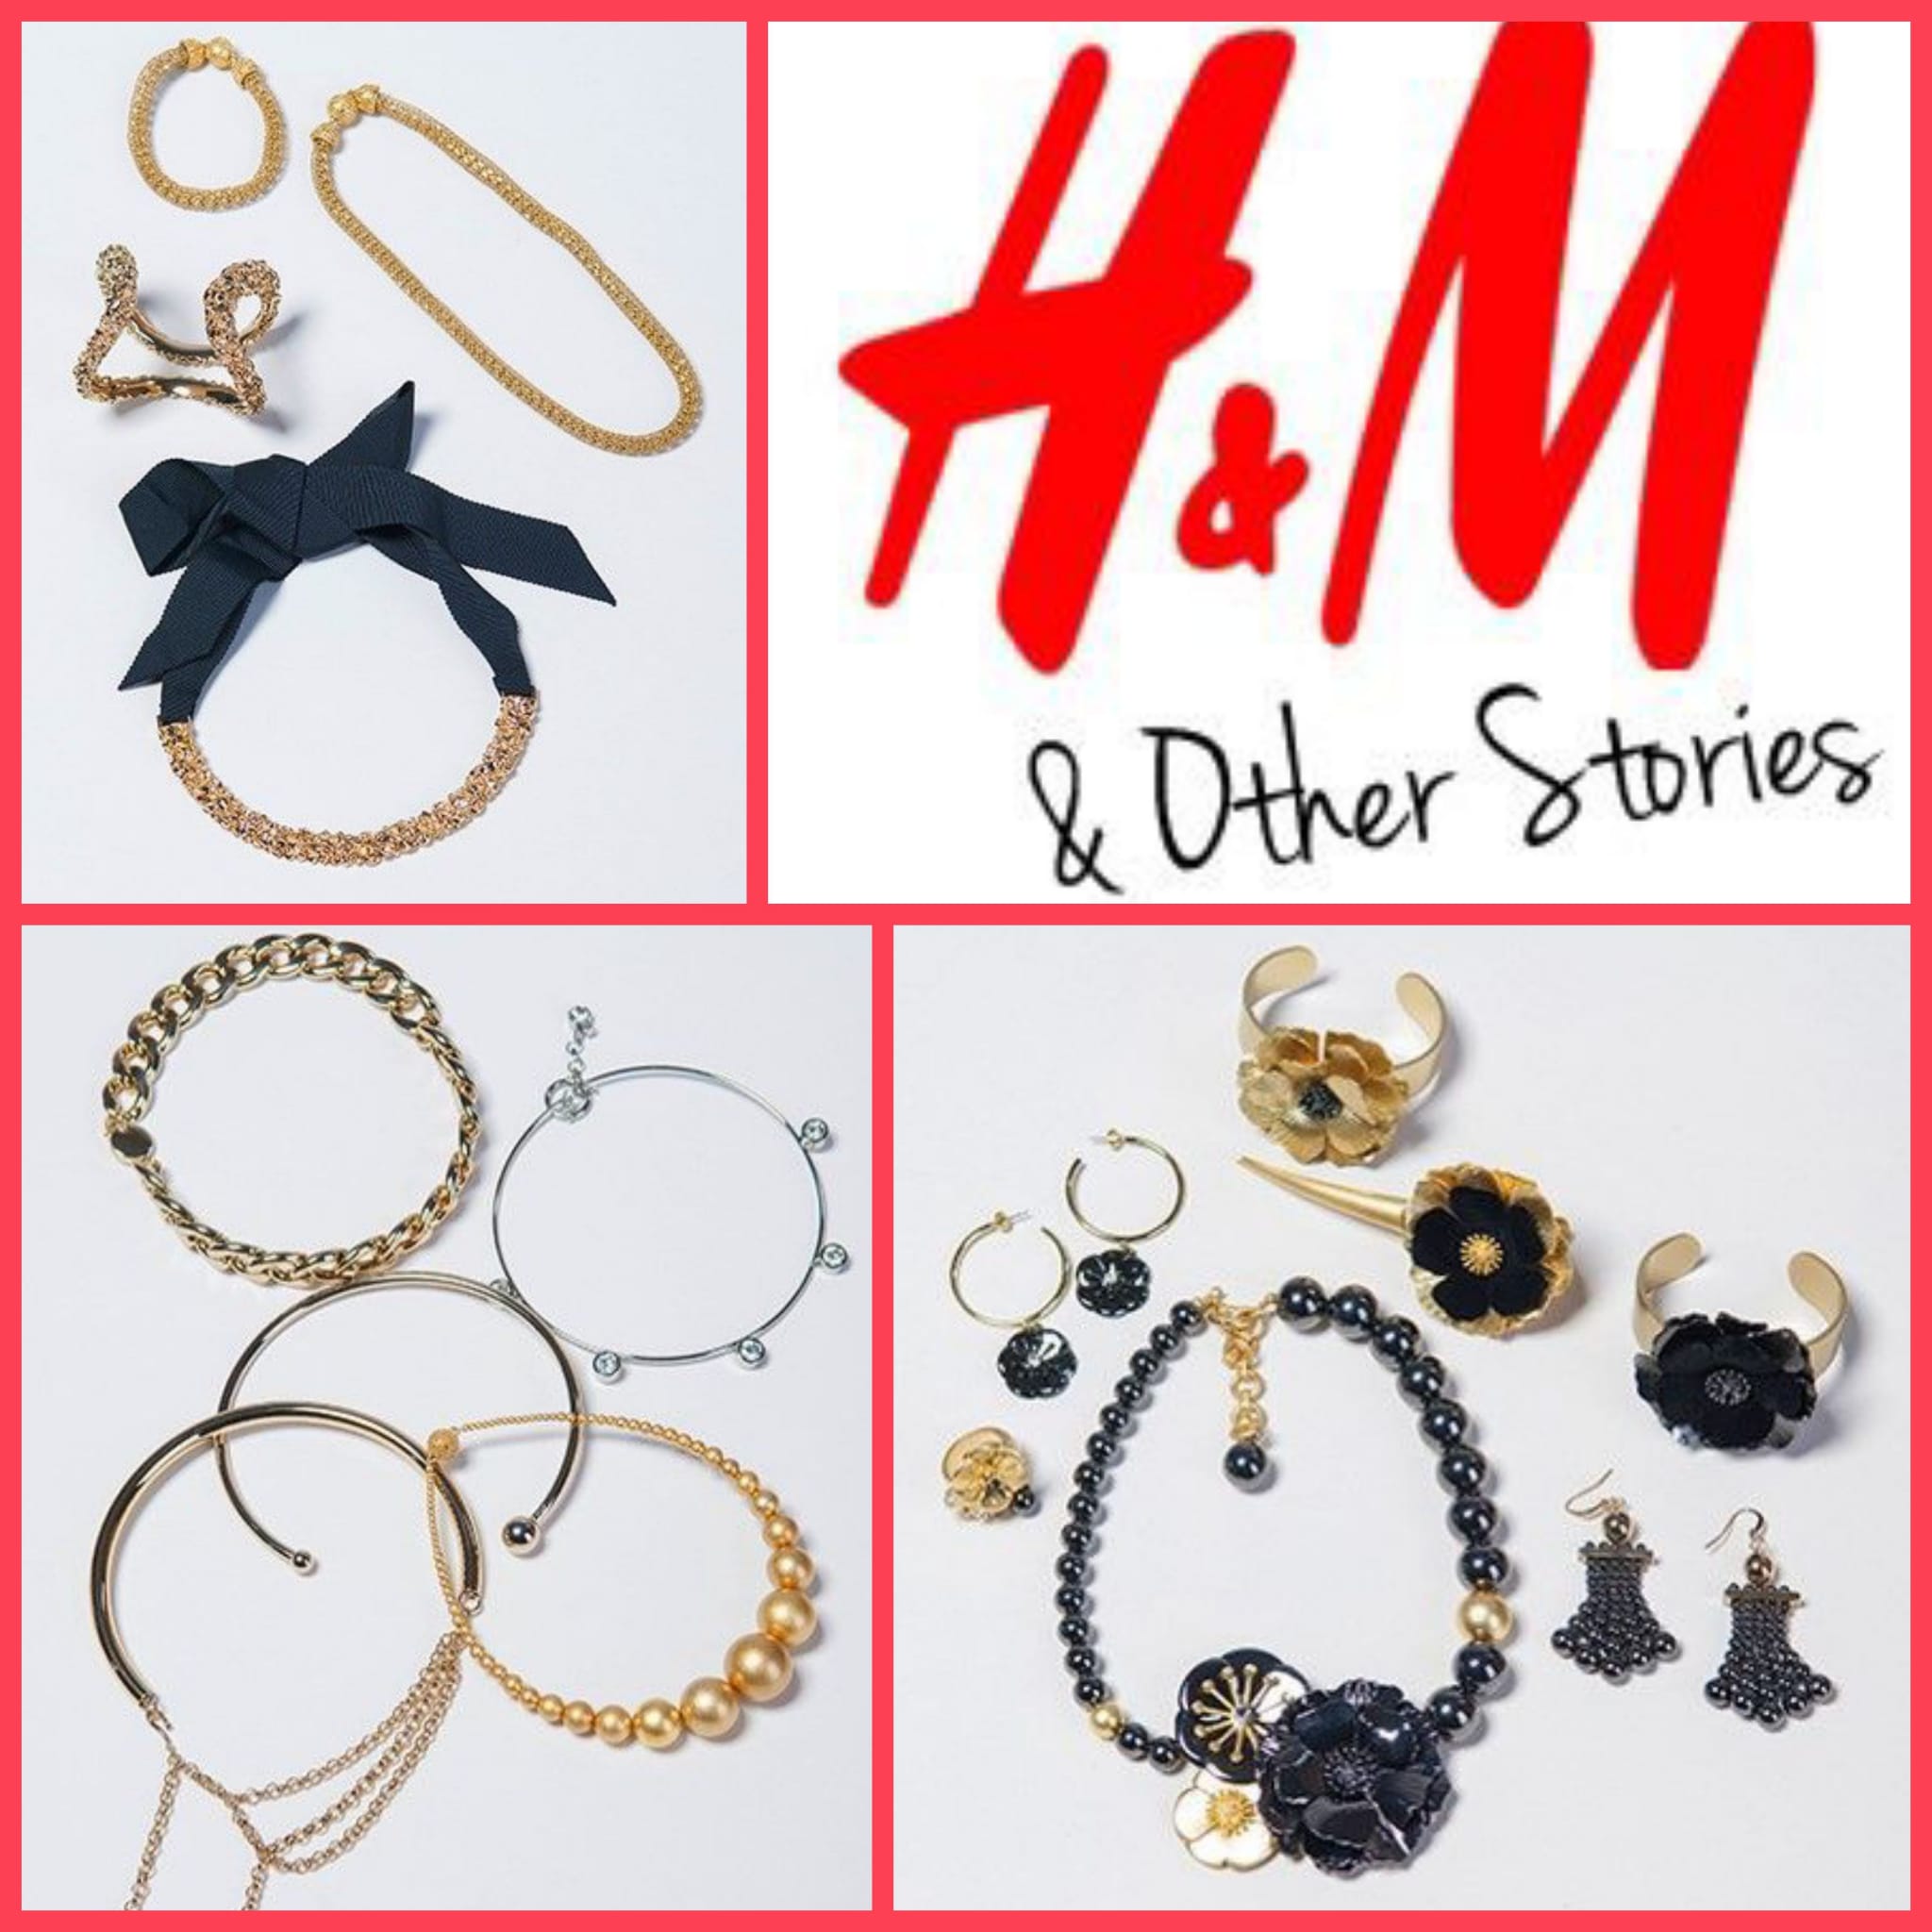 Women's & Other Stories Fashion Jewelry by H&M 